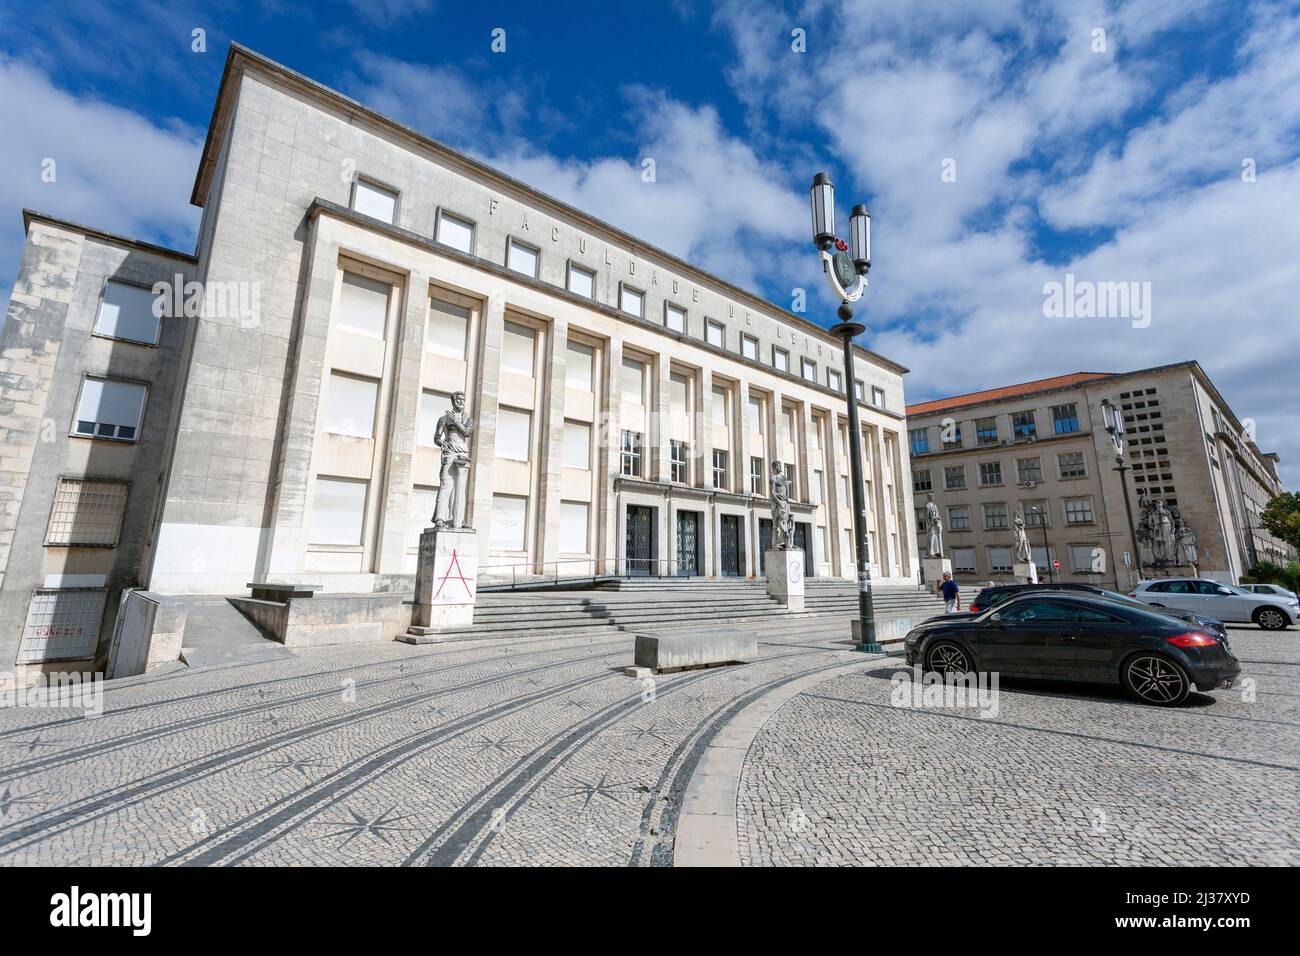 Europe, Portugal, Beira Litoral Province, Coimbra, The Faculty of Humanities (Faculdade de Letras) Building of the University of Coimbra. Stock Photo